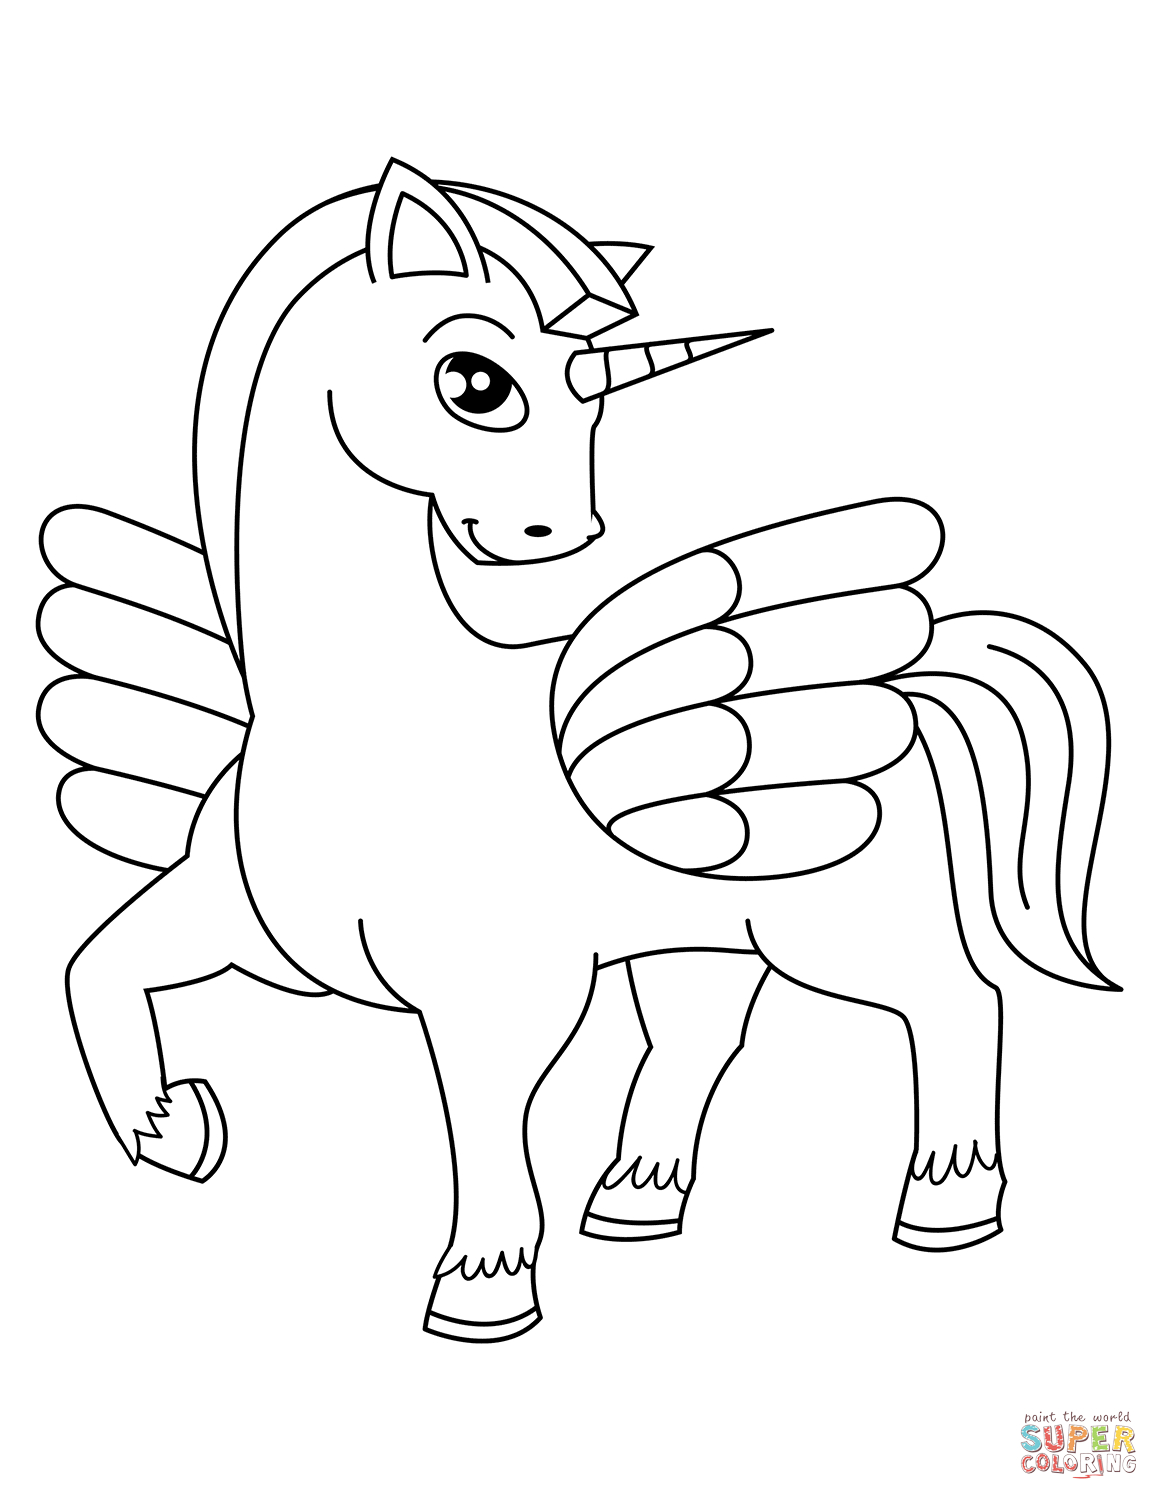 Unicorn Color Page Unicorn Coloring Pages Free Coloring Pages